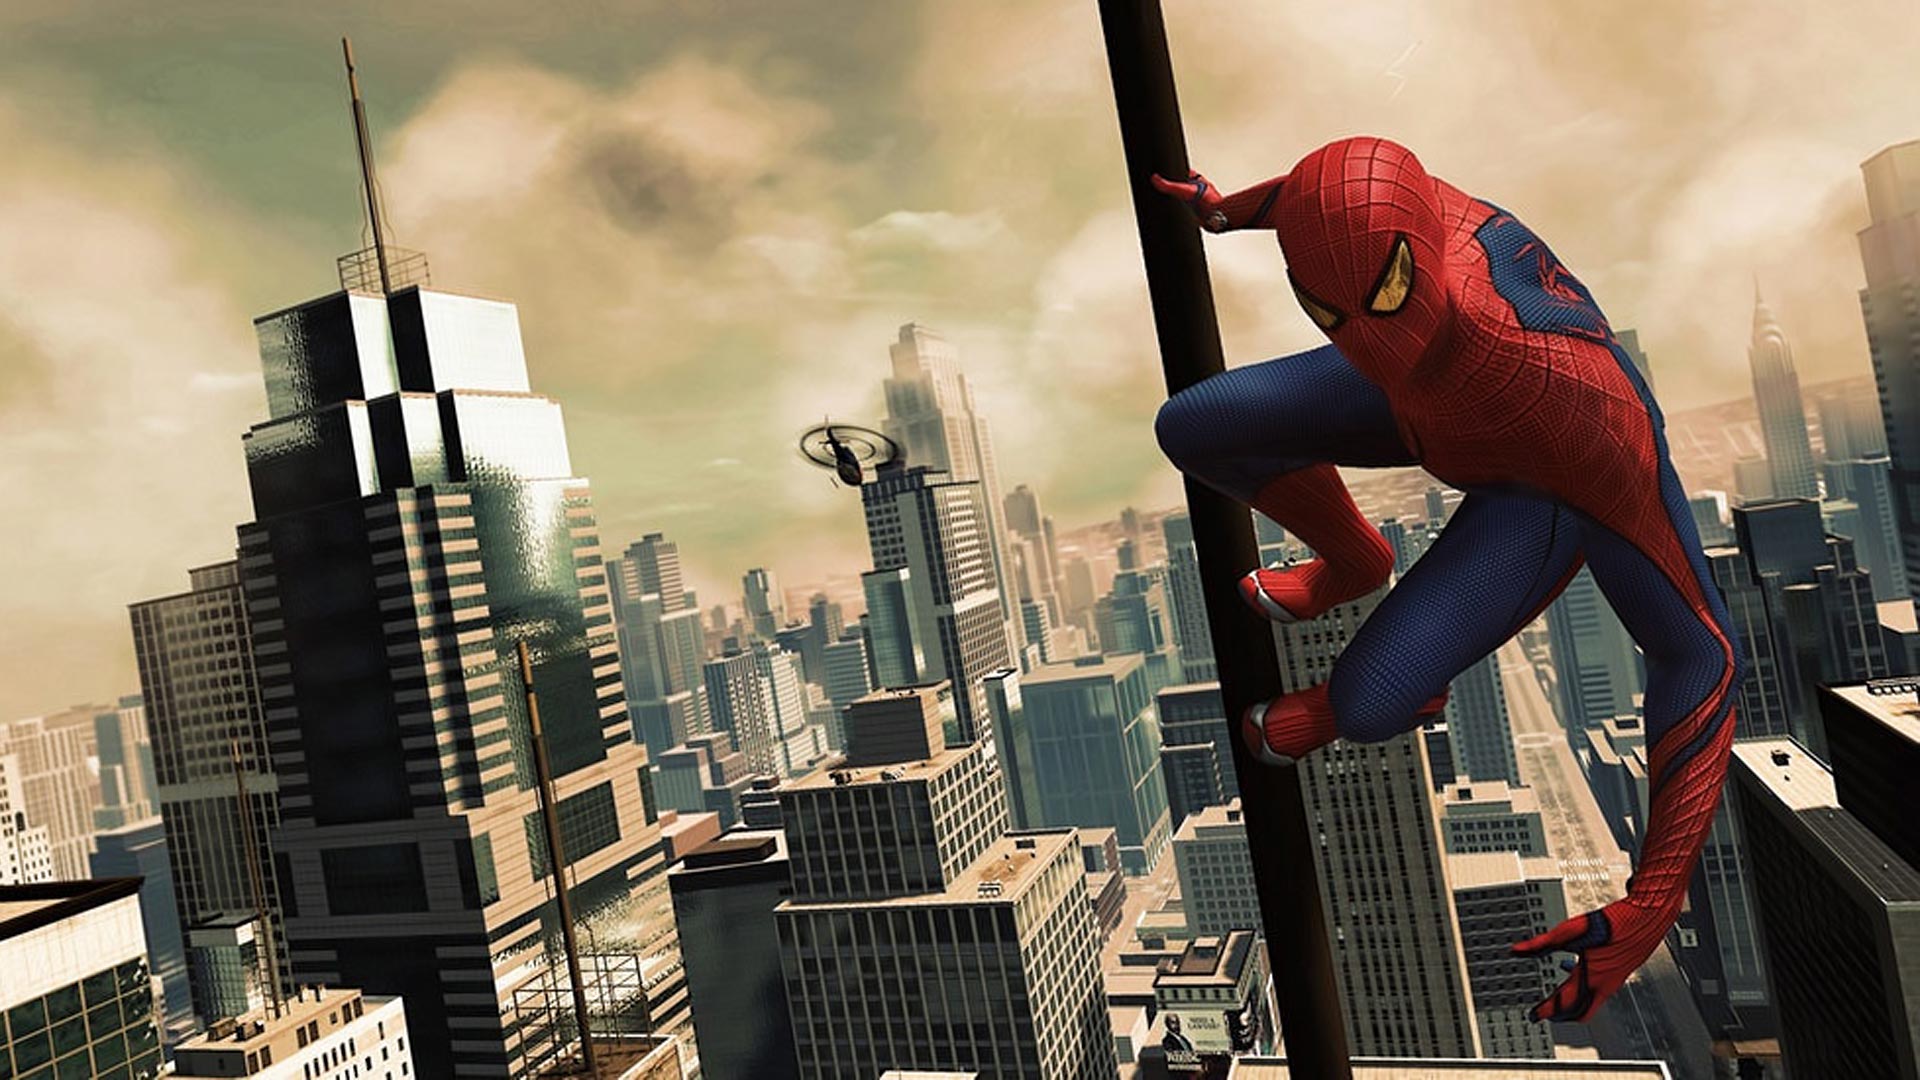 the amazing spider man hd wallpaper - Background Wallpapers for ...